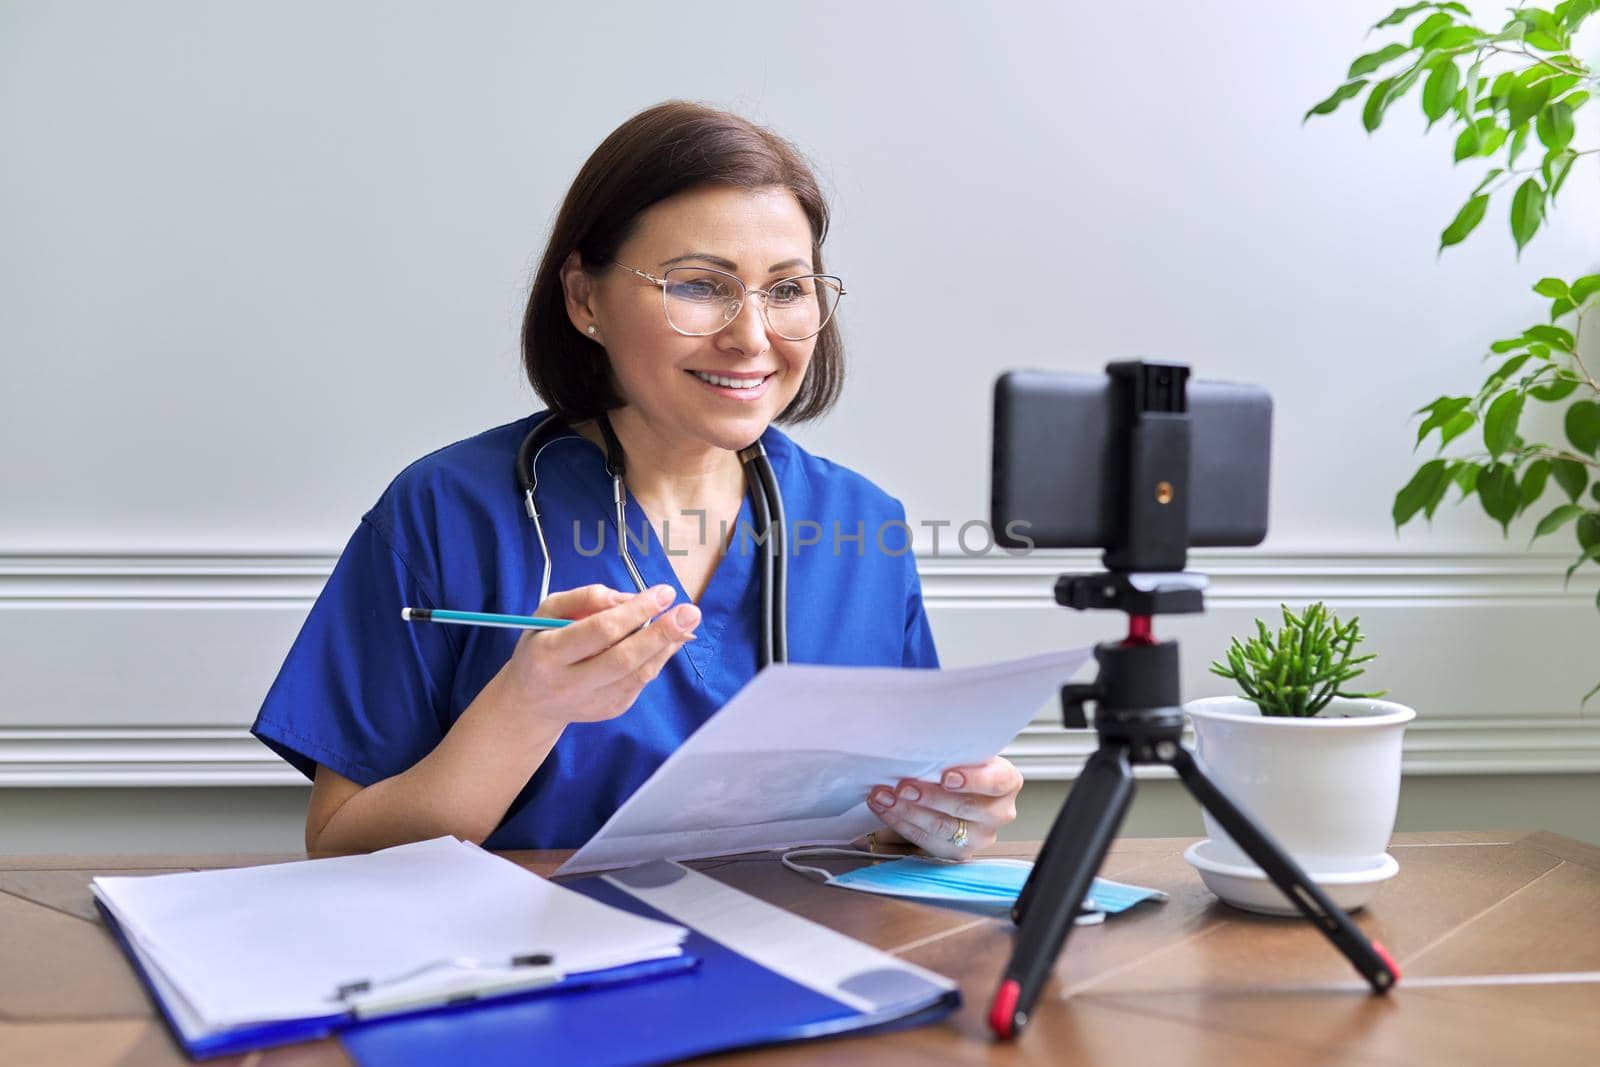 Online doctor consultation, female talking with patient using video call by VH-studio